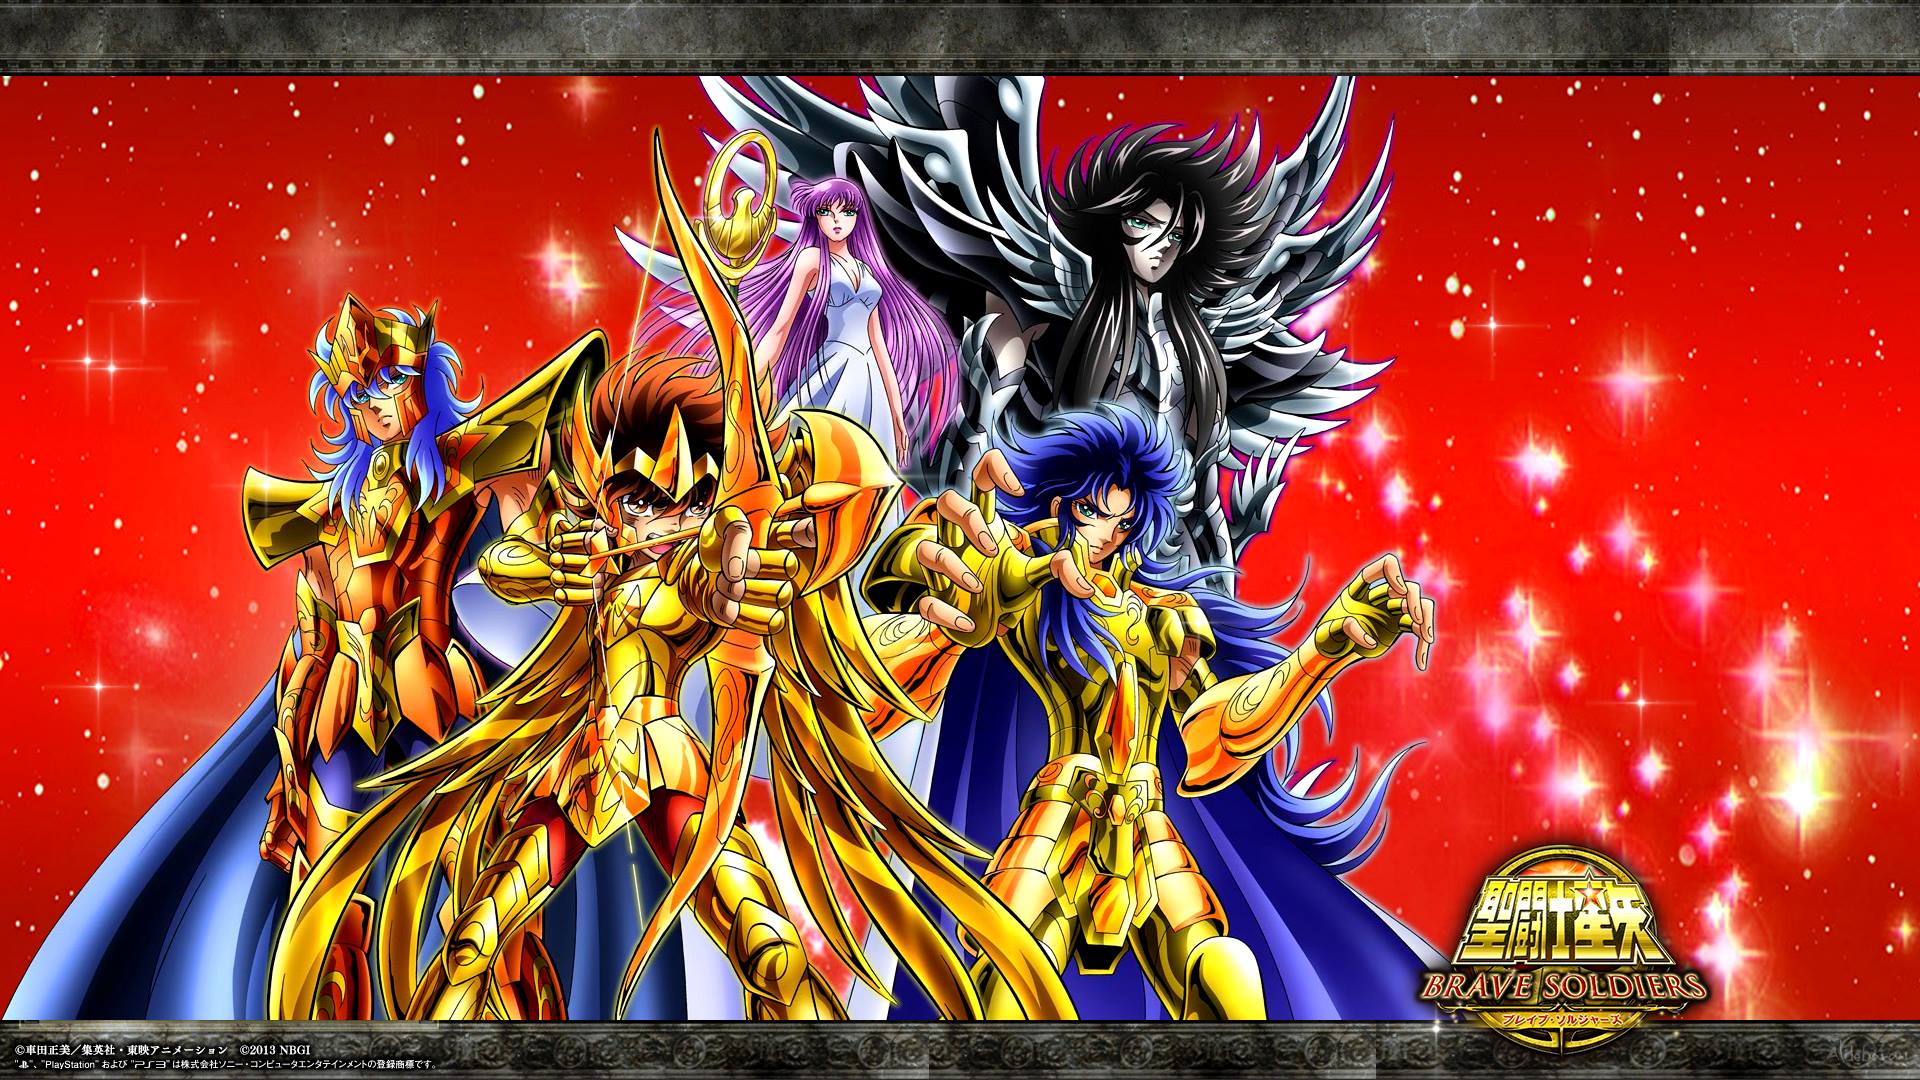 Saint Seiya Brave Soldiers Wallpaper By Sonicx2011 On